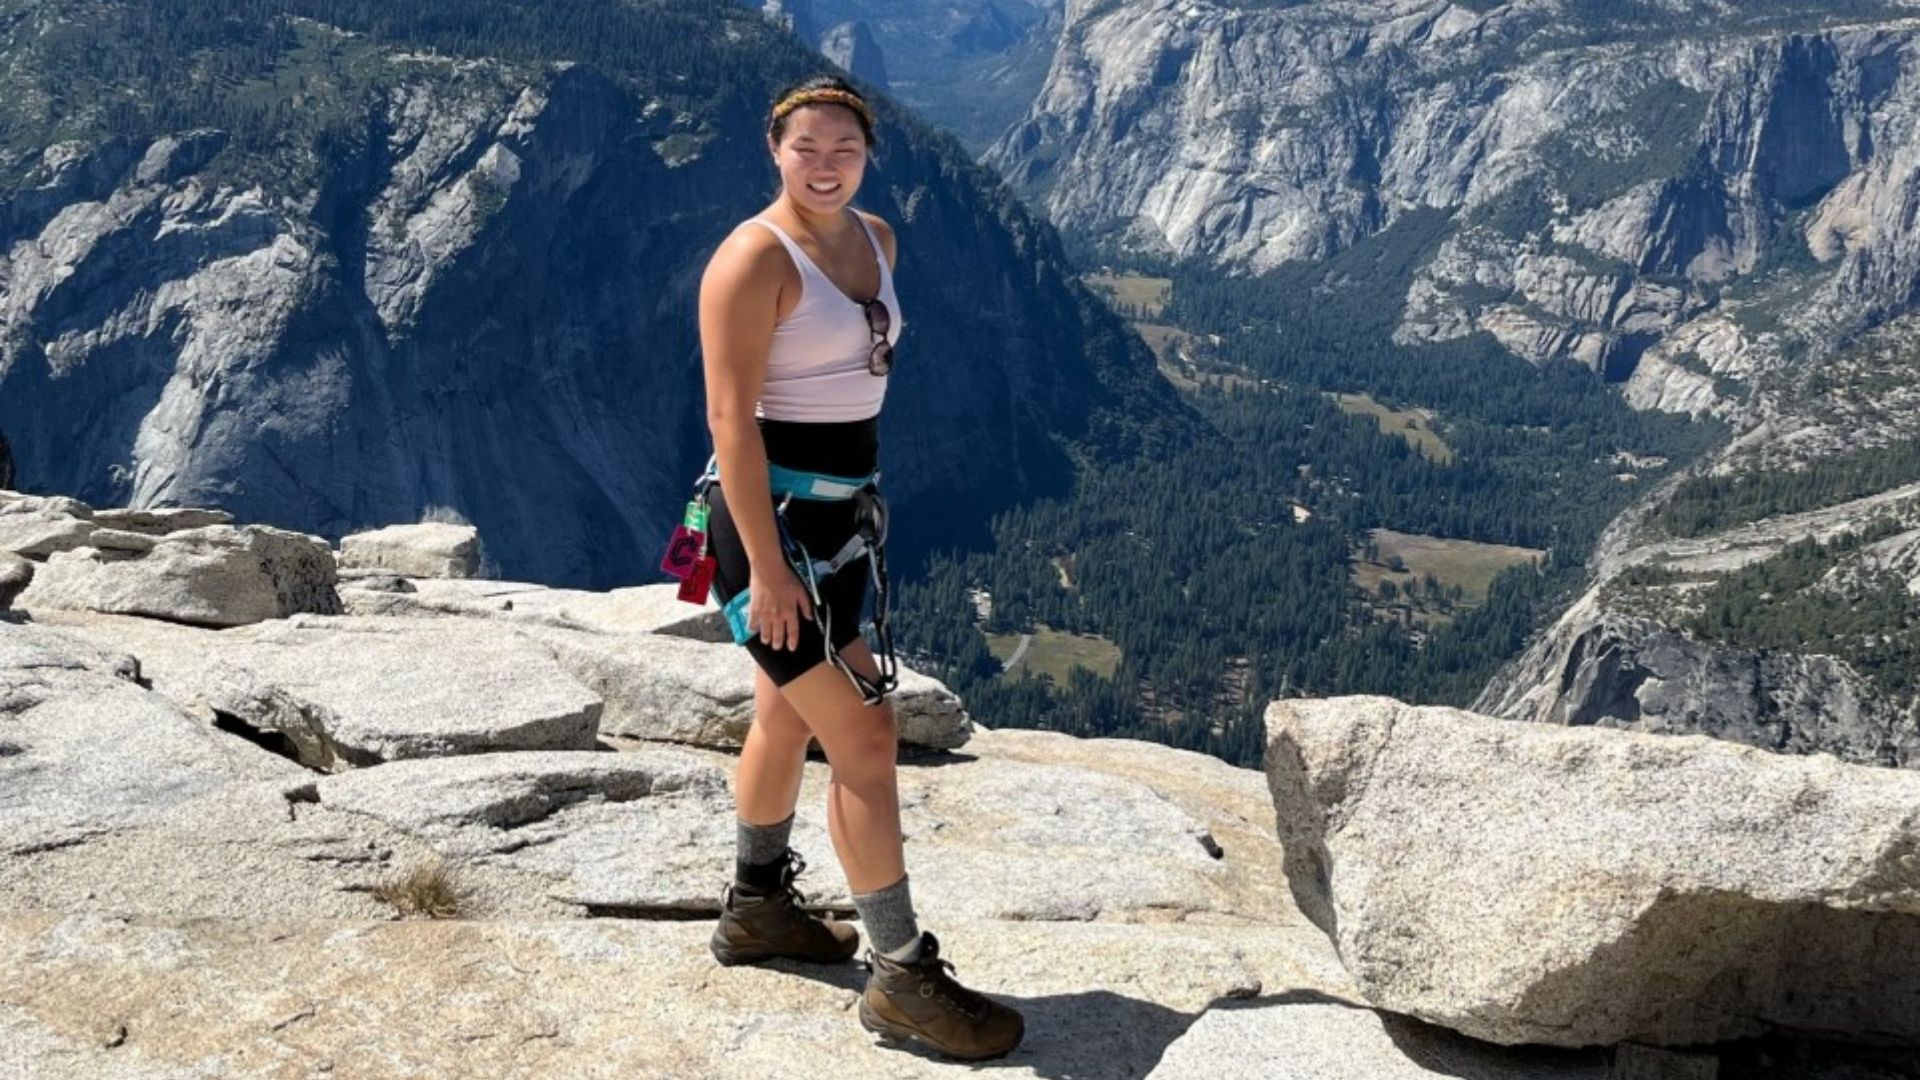 Vina Le at the top of the Yosemites half dome after ankle fracture.